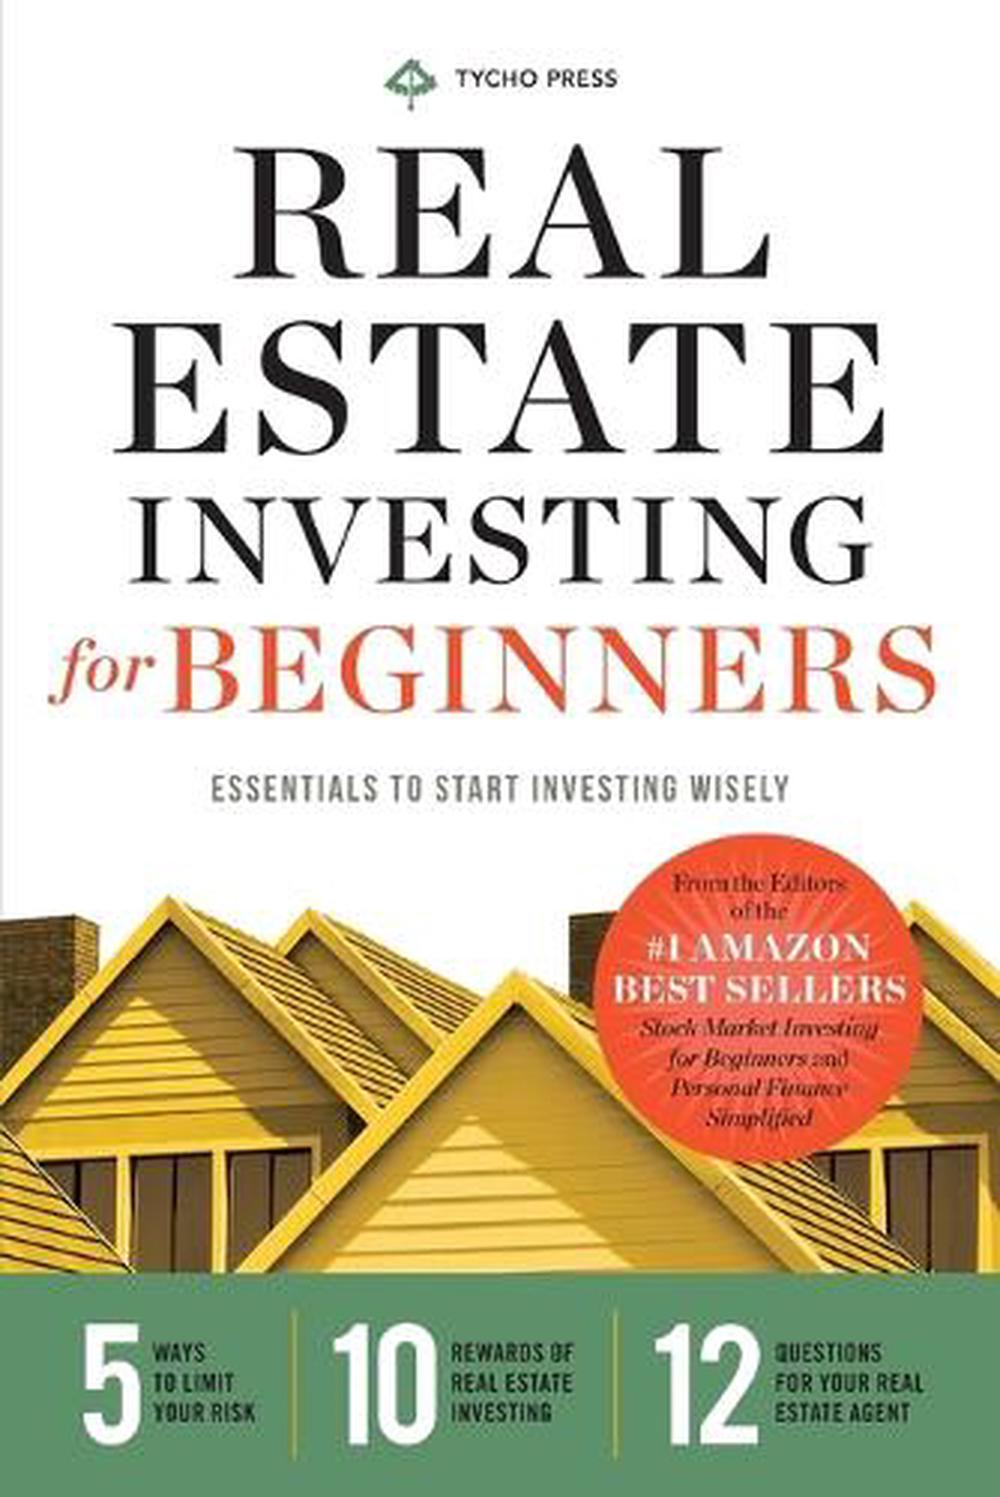 real estate investing business plan beginners